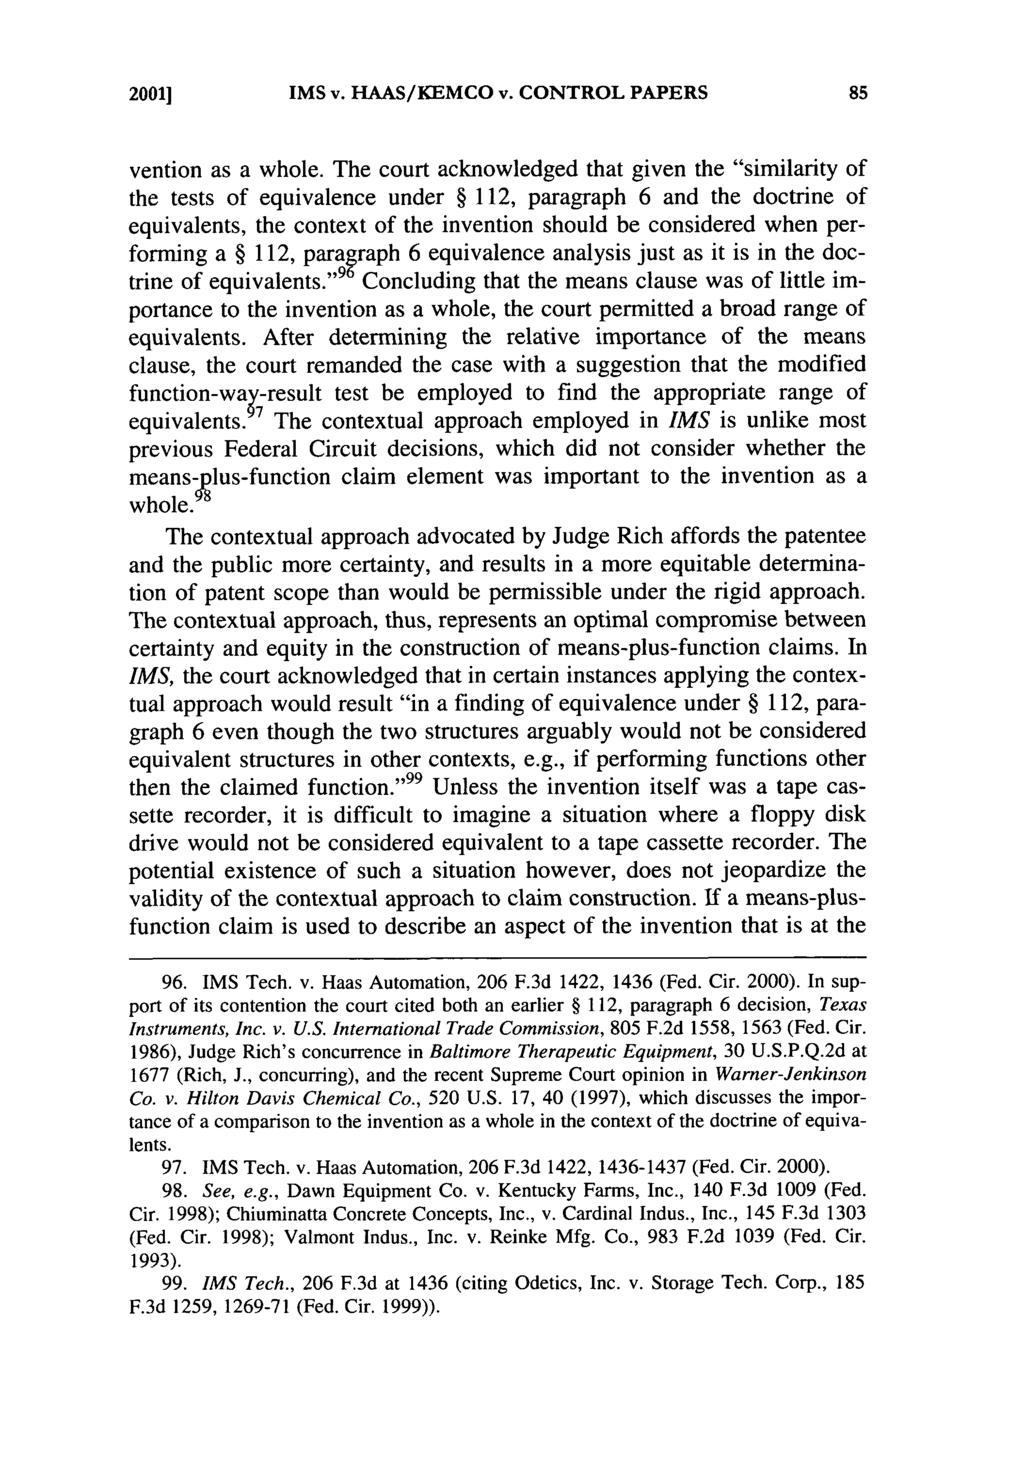 20011 IMS v. HAAS/KEMCO v. CONTROL PAPERS vention as a whole.